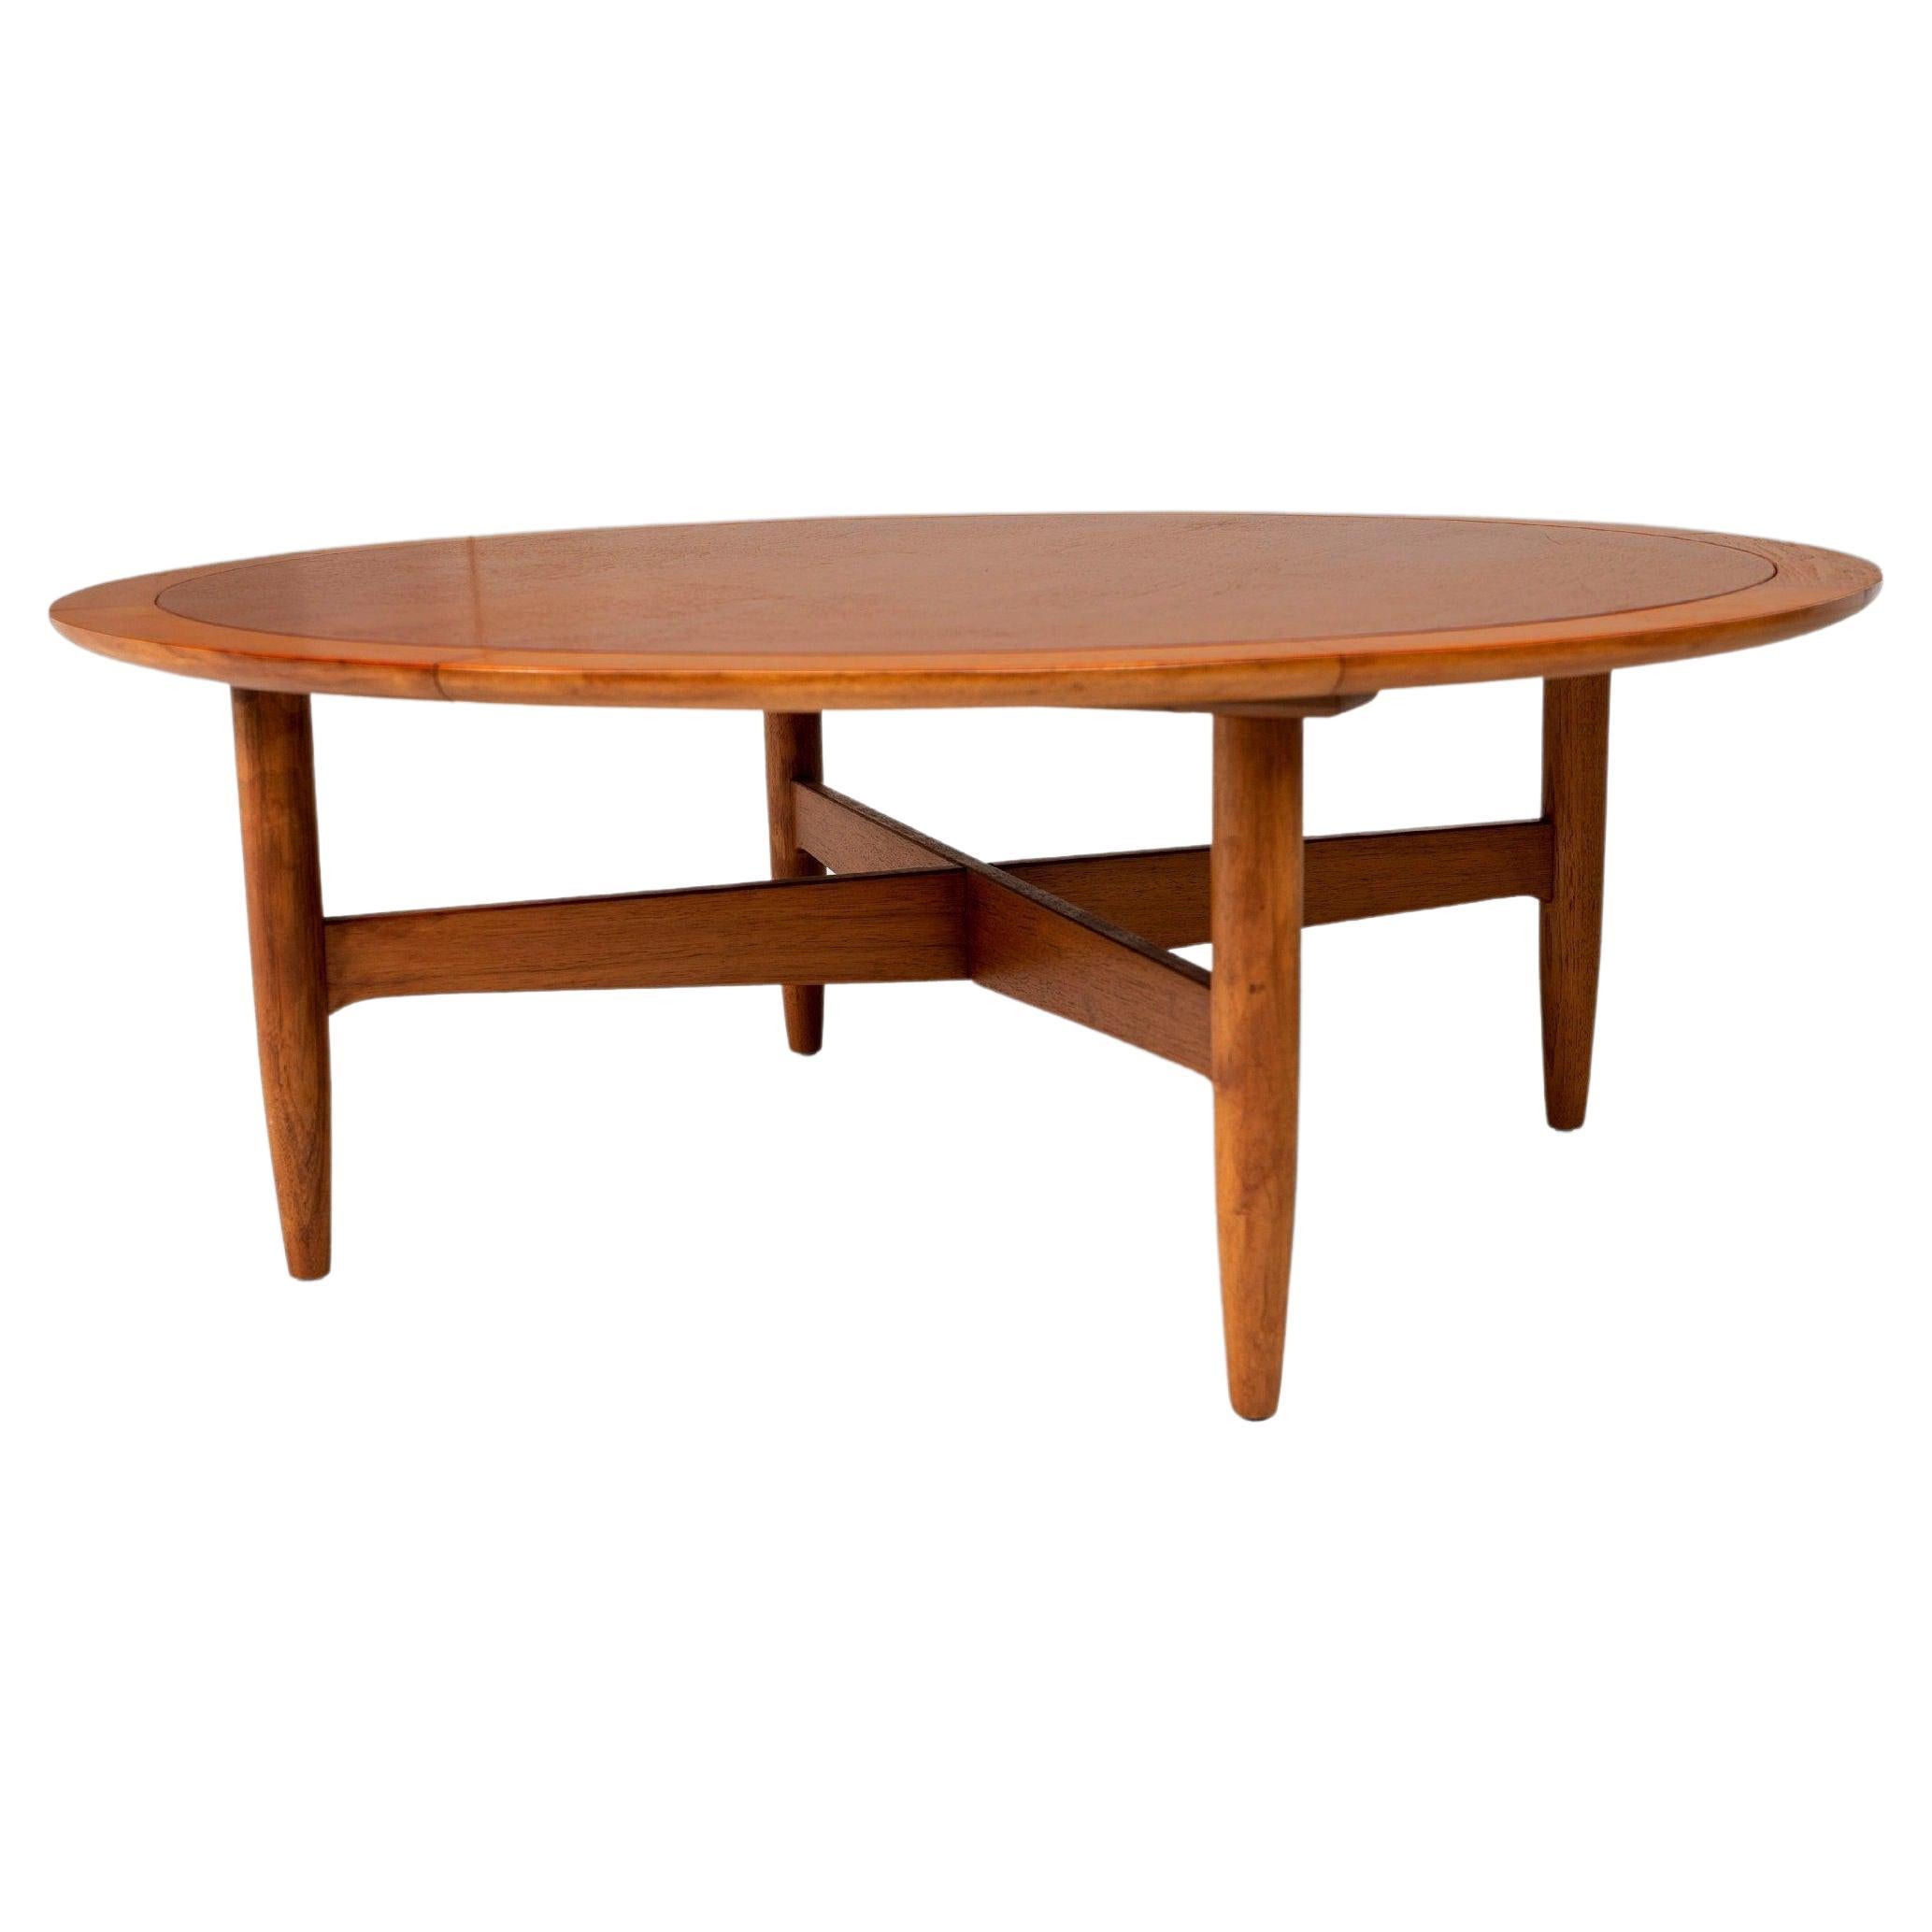 Round Coffee Table Attributed to Lubberts & Mulder for Tomlinson, c. 1960s For Sale